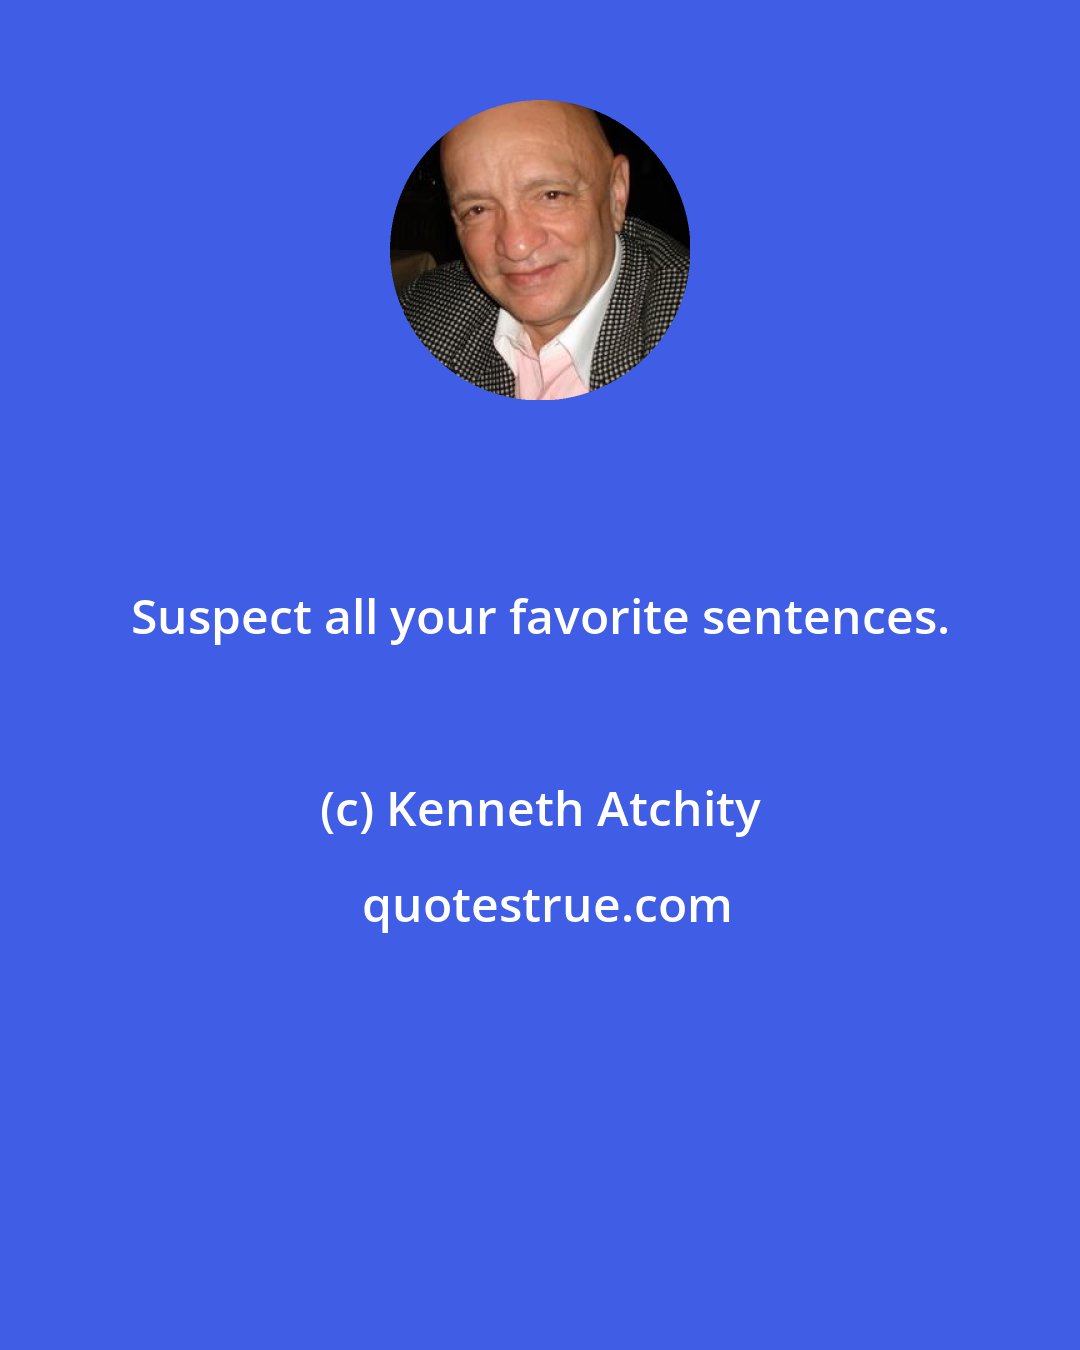 Kenneth Atchity: Suspect all your favorite sentences.